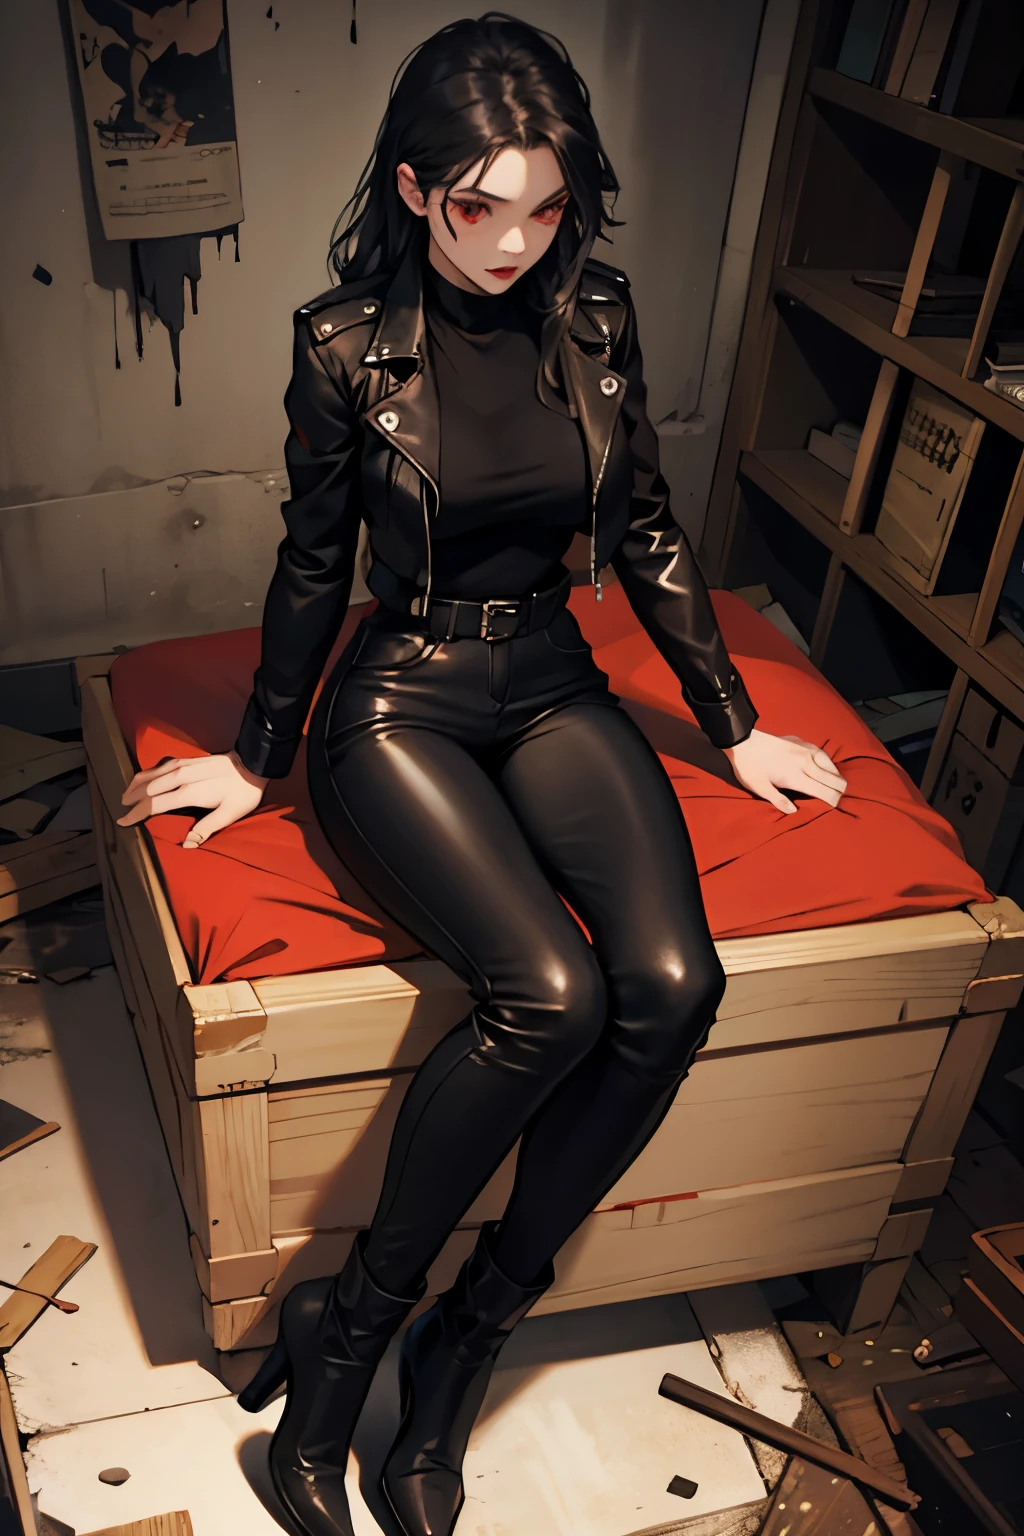 1 vampire girl, long, wavy black hair, red eyes, thin red lips, round face, huge breasts, wearing a dark leather jacket, dark leather tight pants, buccaneer style boots, sitting on top of a coffin in the basement of a abandoned house